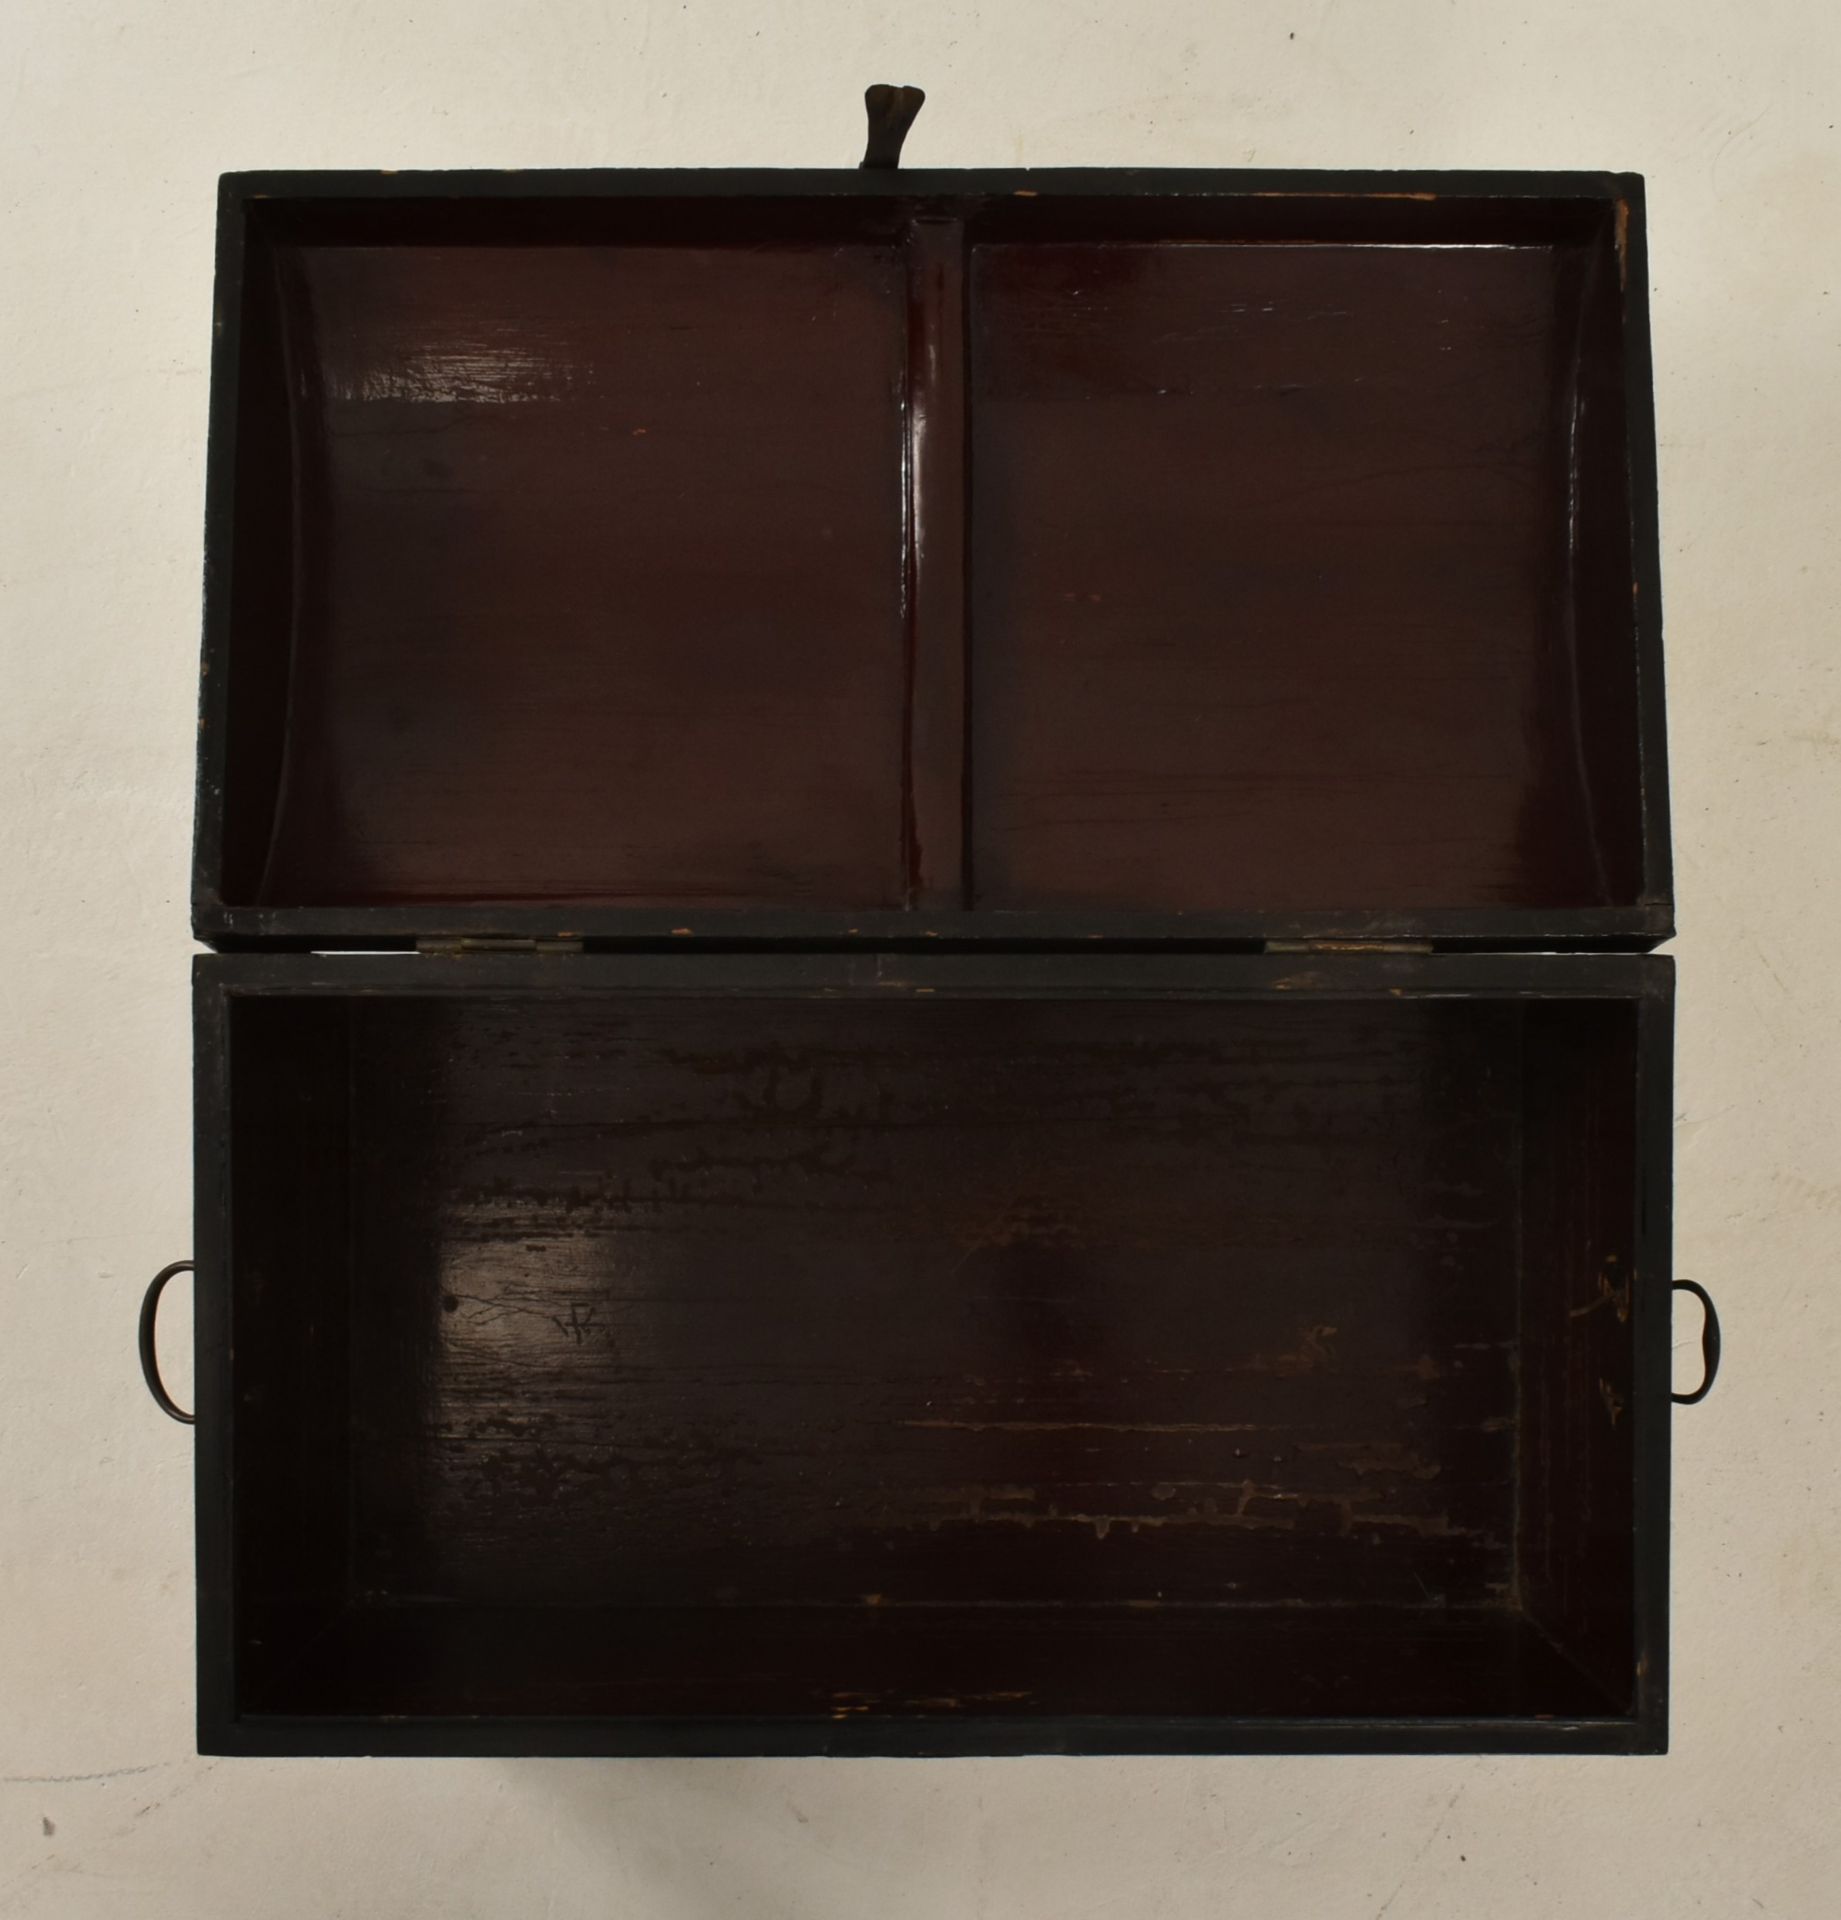 QING DYNASTY WOODEN LACQUERED STORAGE CHEST 清 富贵木宝箱 - Image 8 of 10